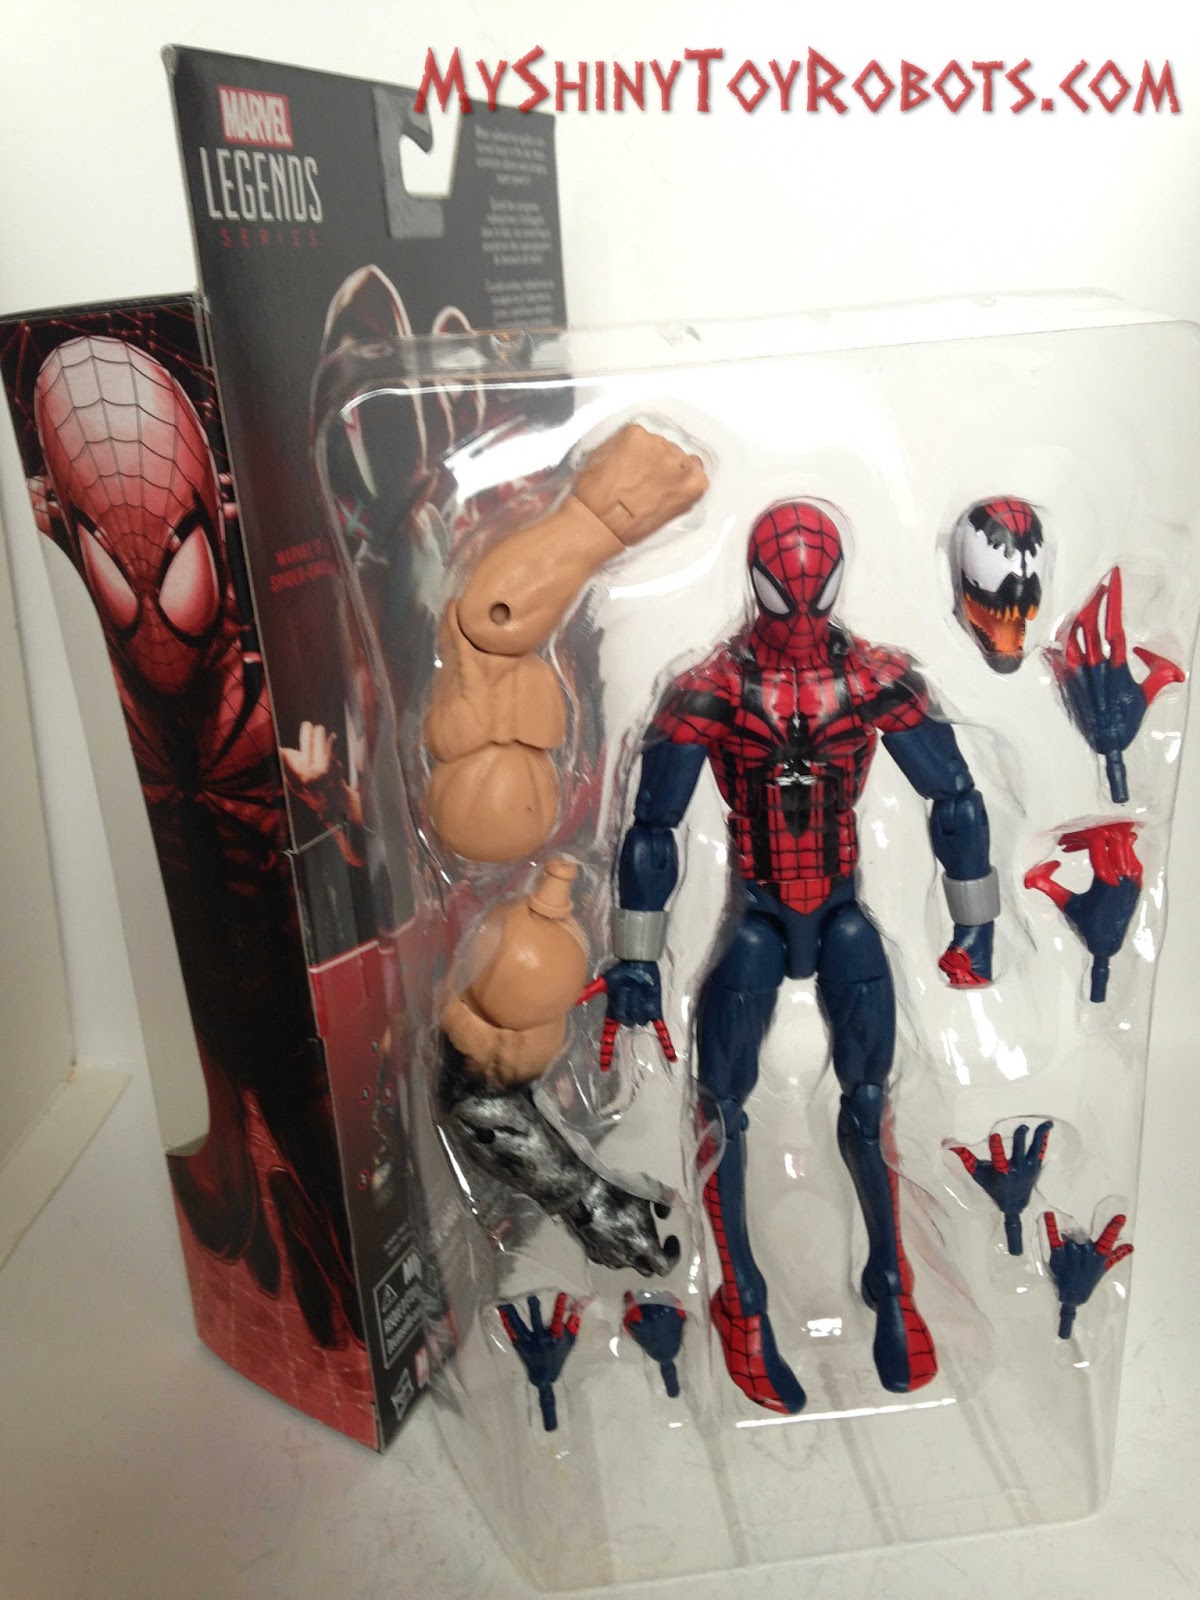 My Shiny Toy Robots: Toybox REVIEW: Marvel Legends Spider-Man (Ben 